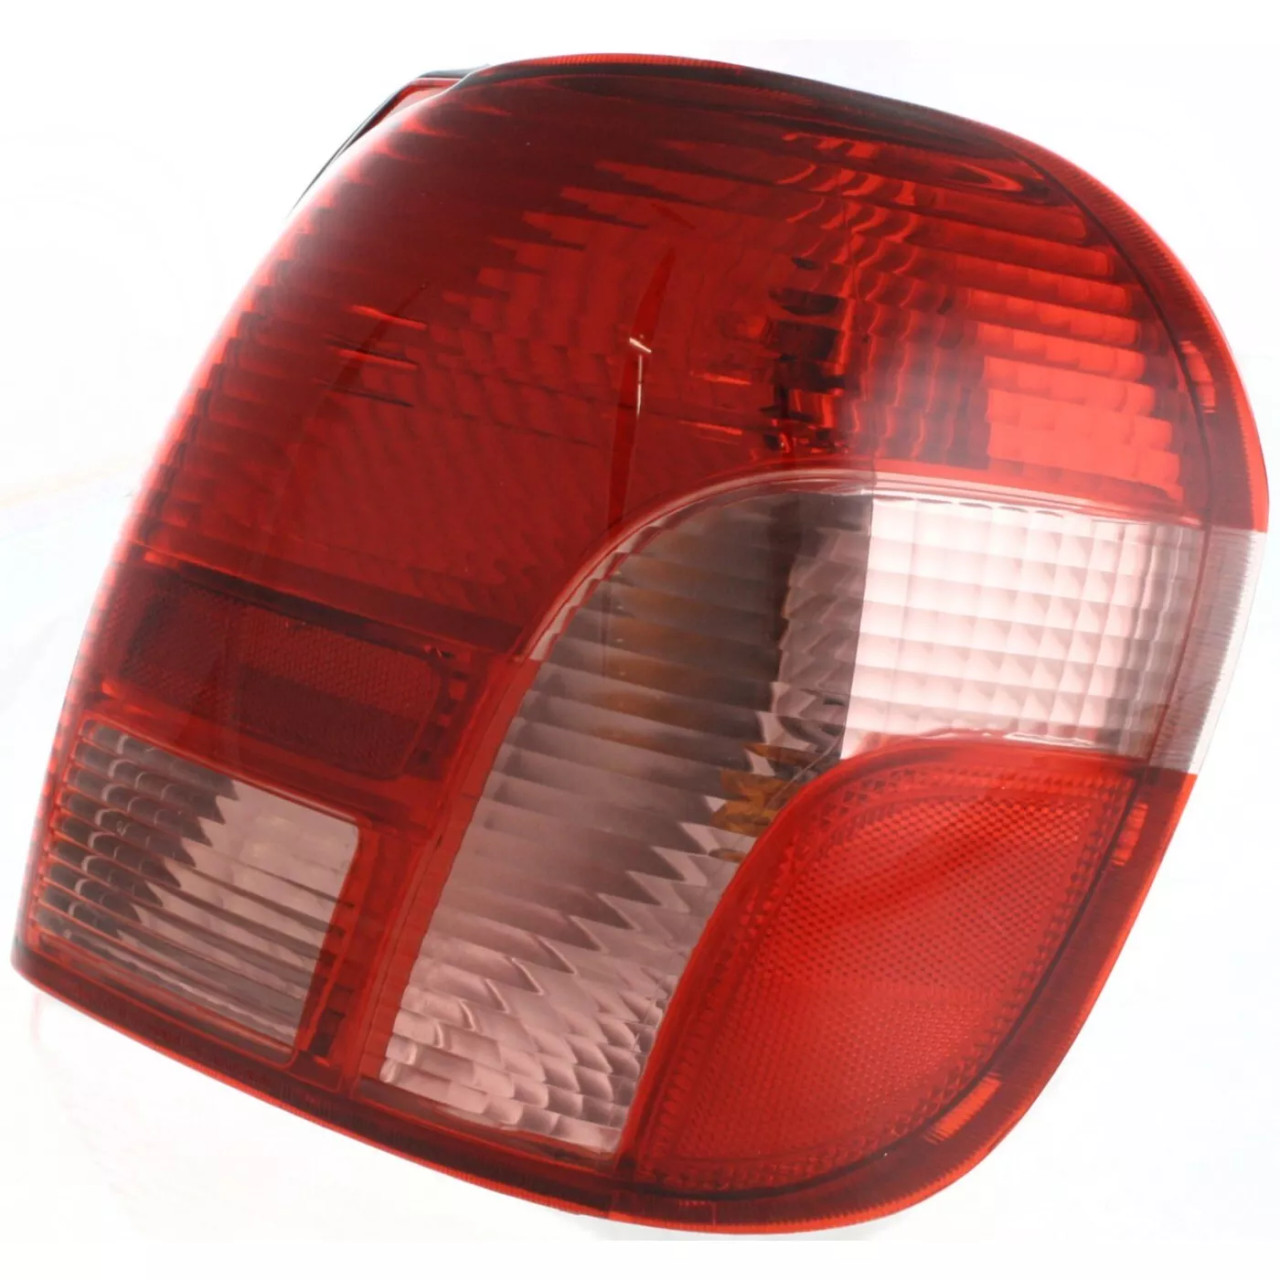 Halogen Tail Light Set For 2000-2002 Toyota Echo Clear & Red Lens w/ Bulbs 2Pcs